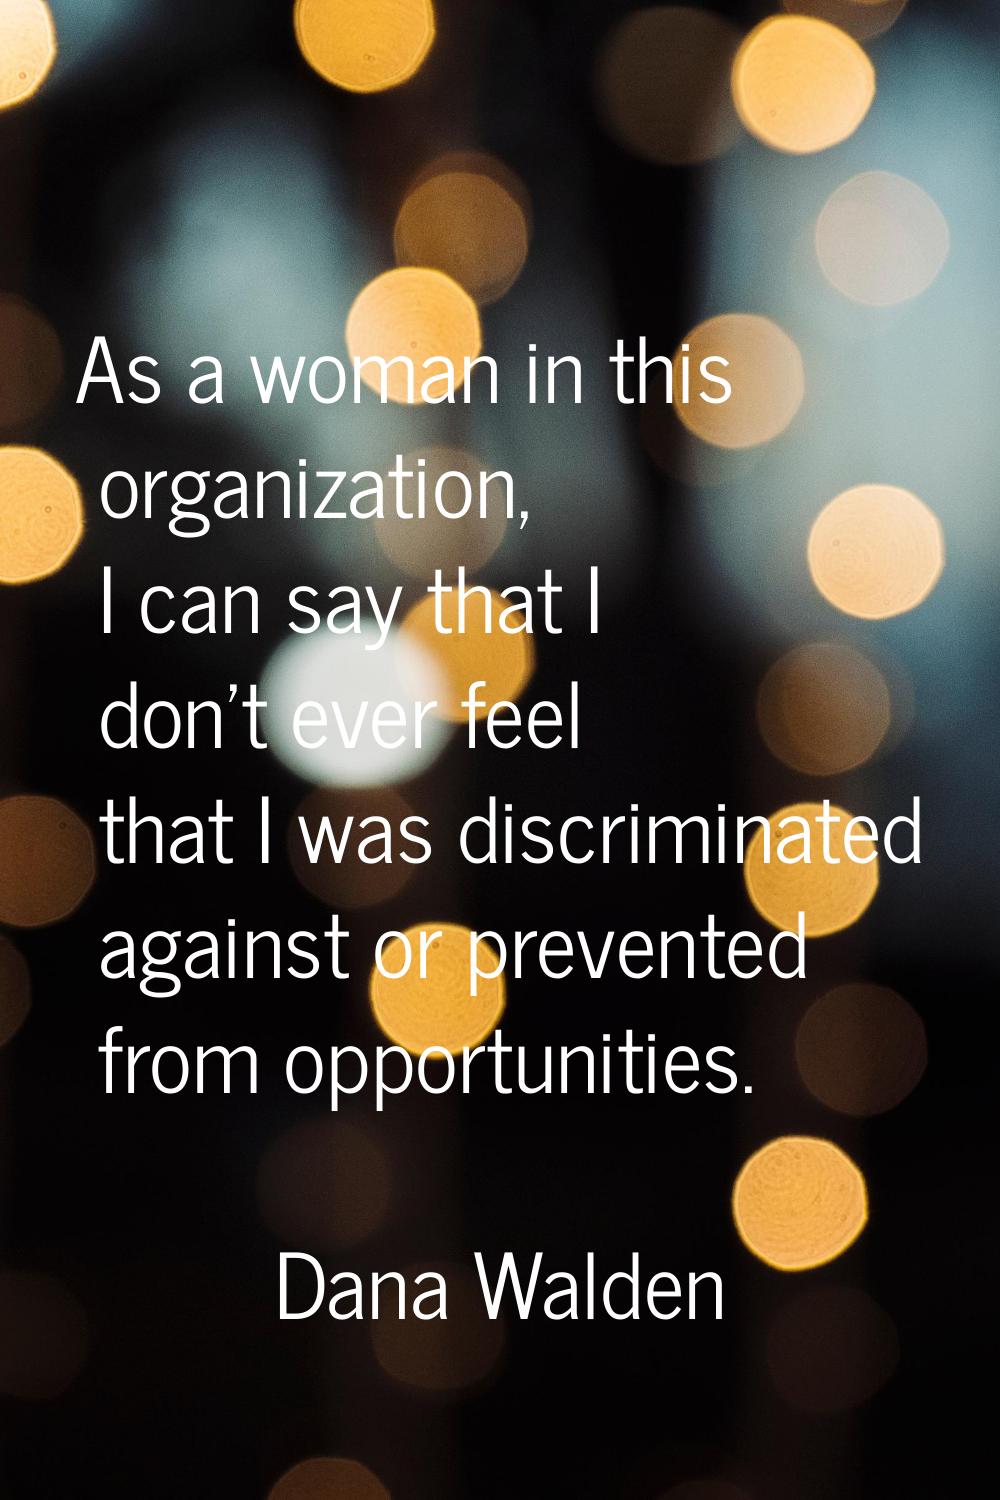 As a woman in this organization, I can say that I don't ever feel that I was discriminated against 